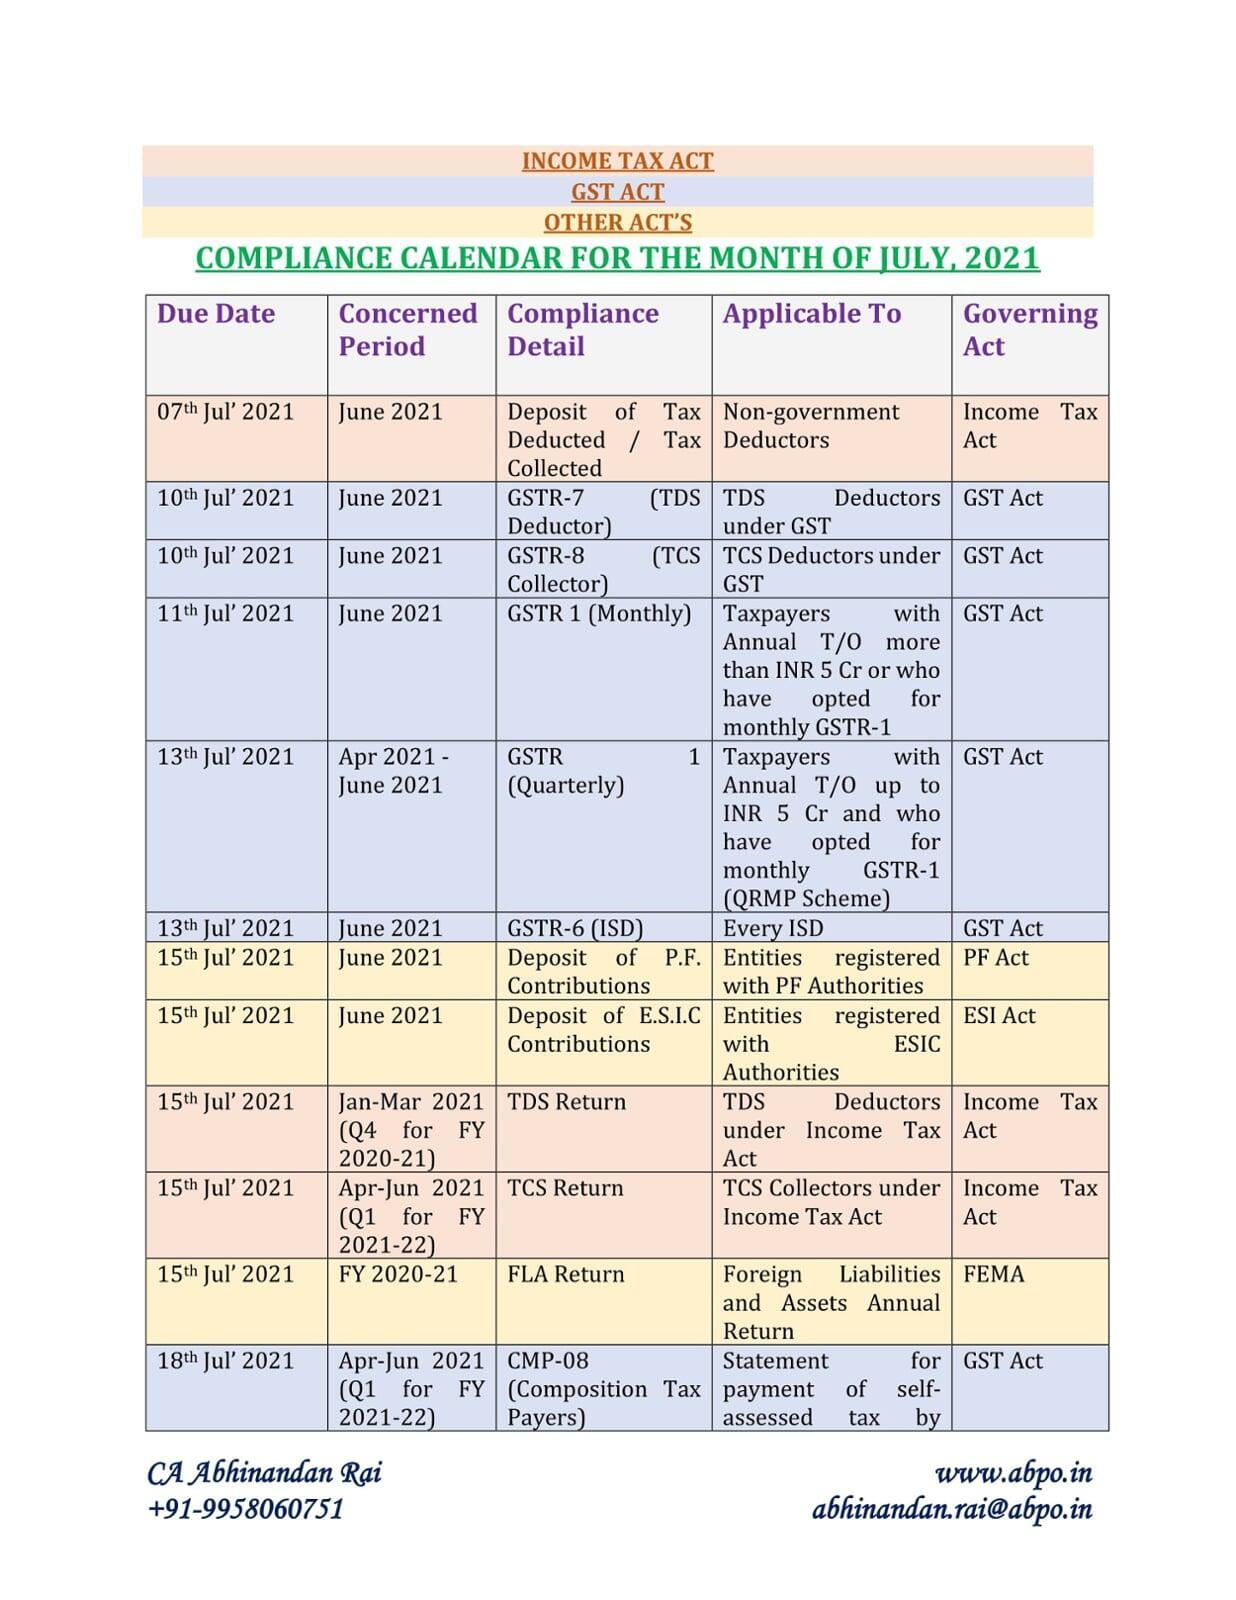 COMPLIANCE CALENDAR FOR THE MONTH OF JULY 2021